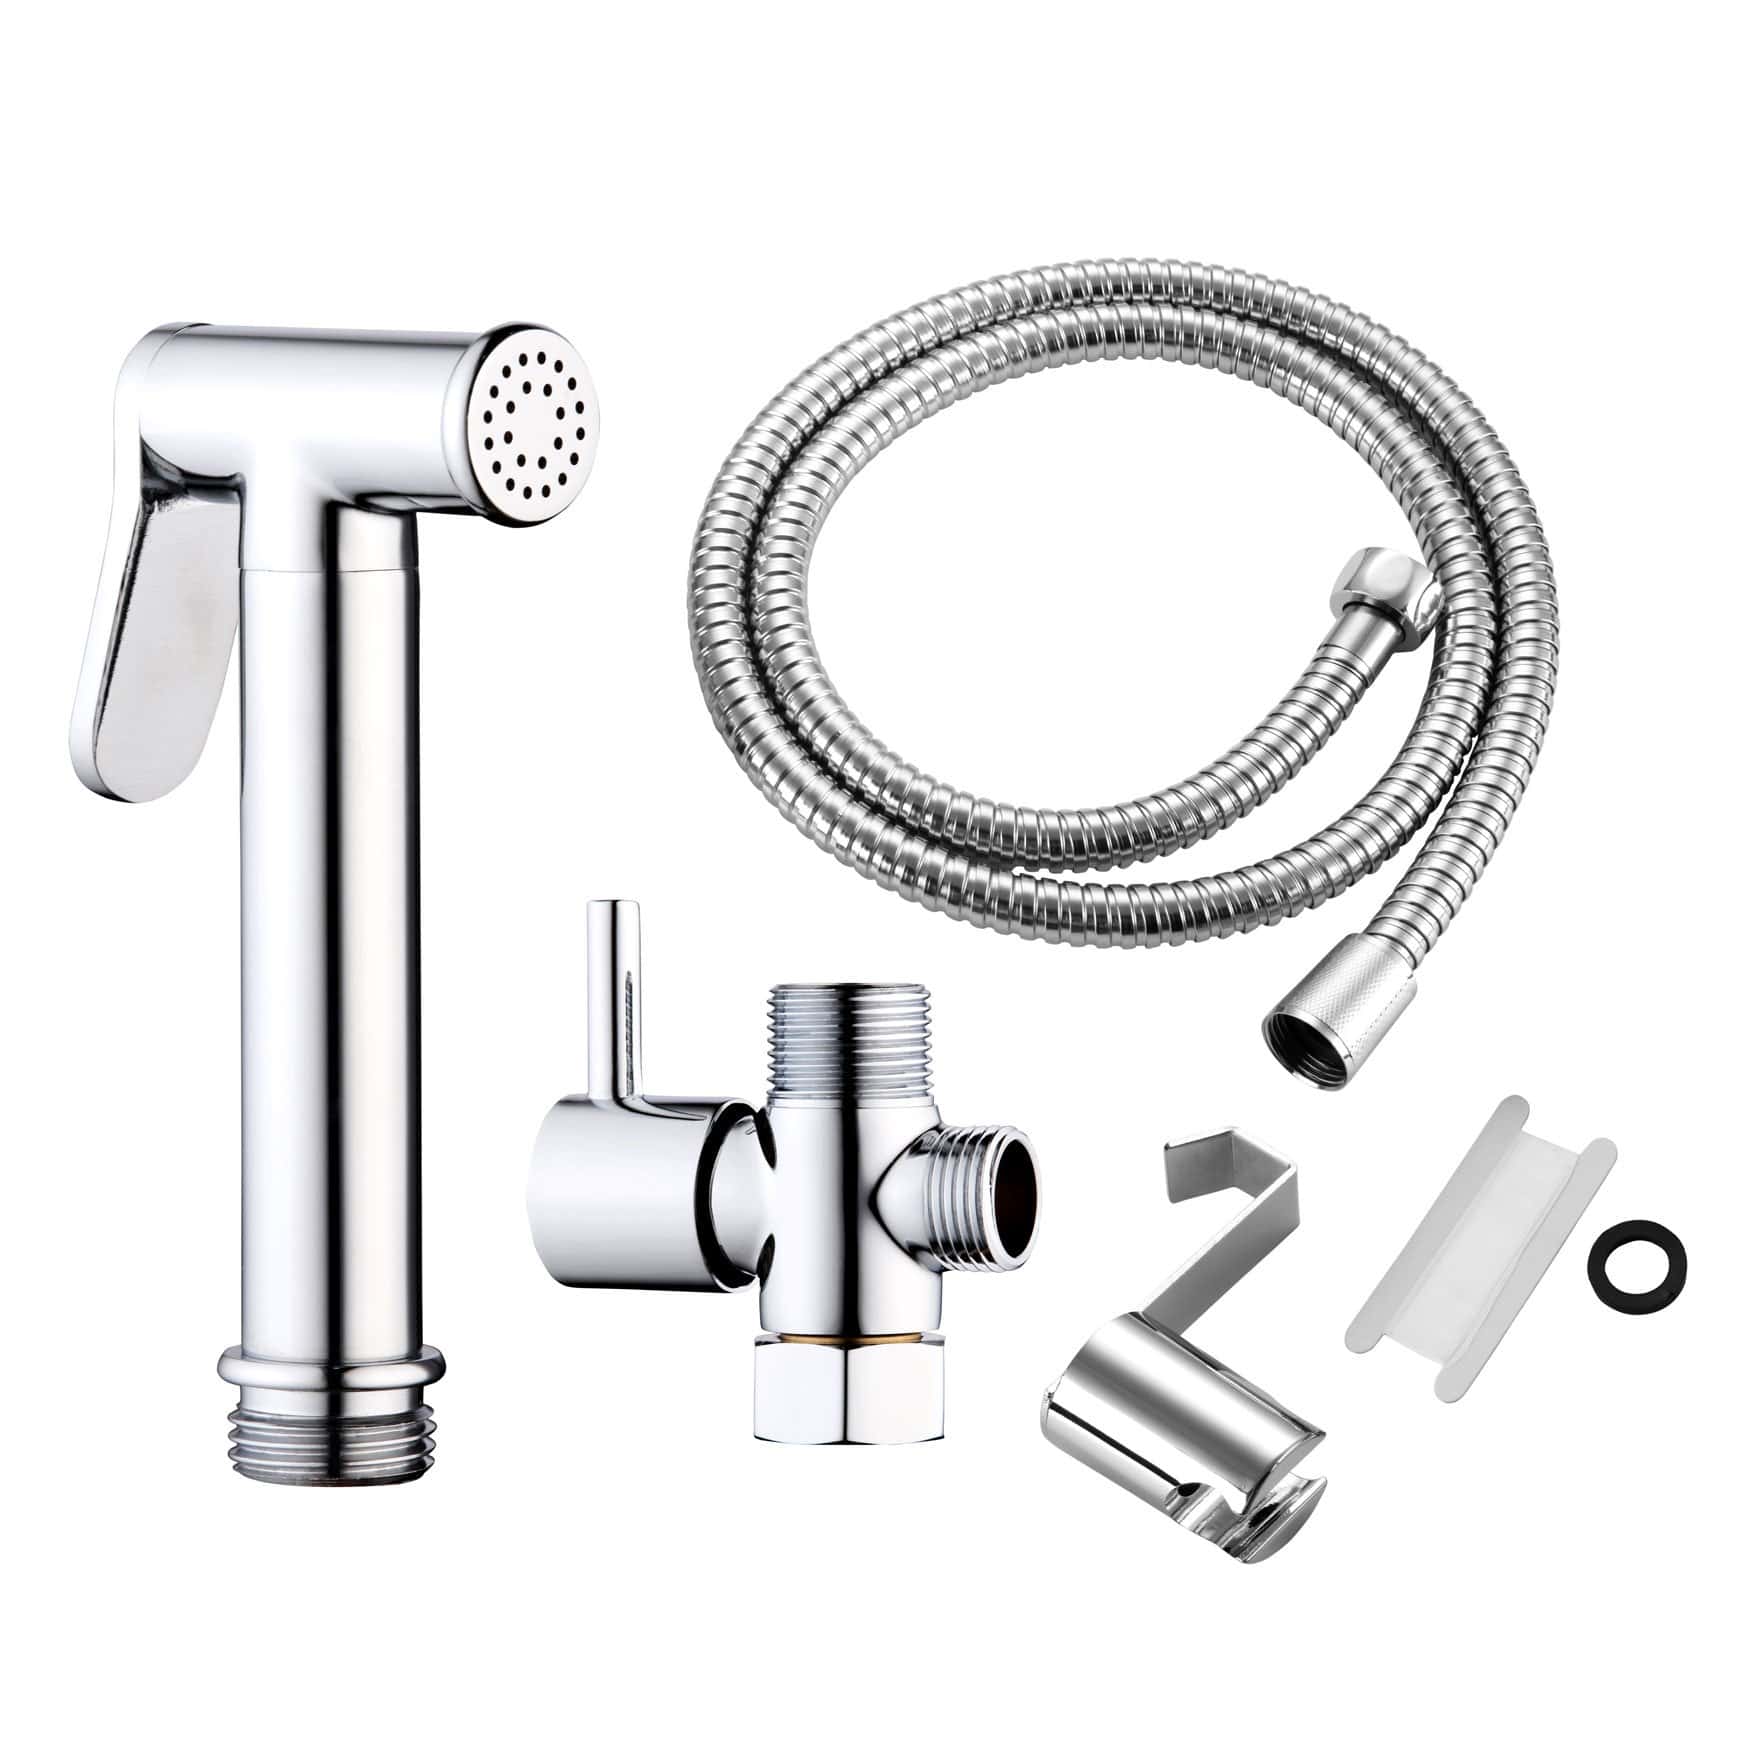 All parts included with the Handheld Bidet LUXE 90 (Chrome)